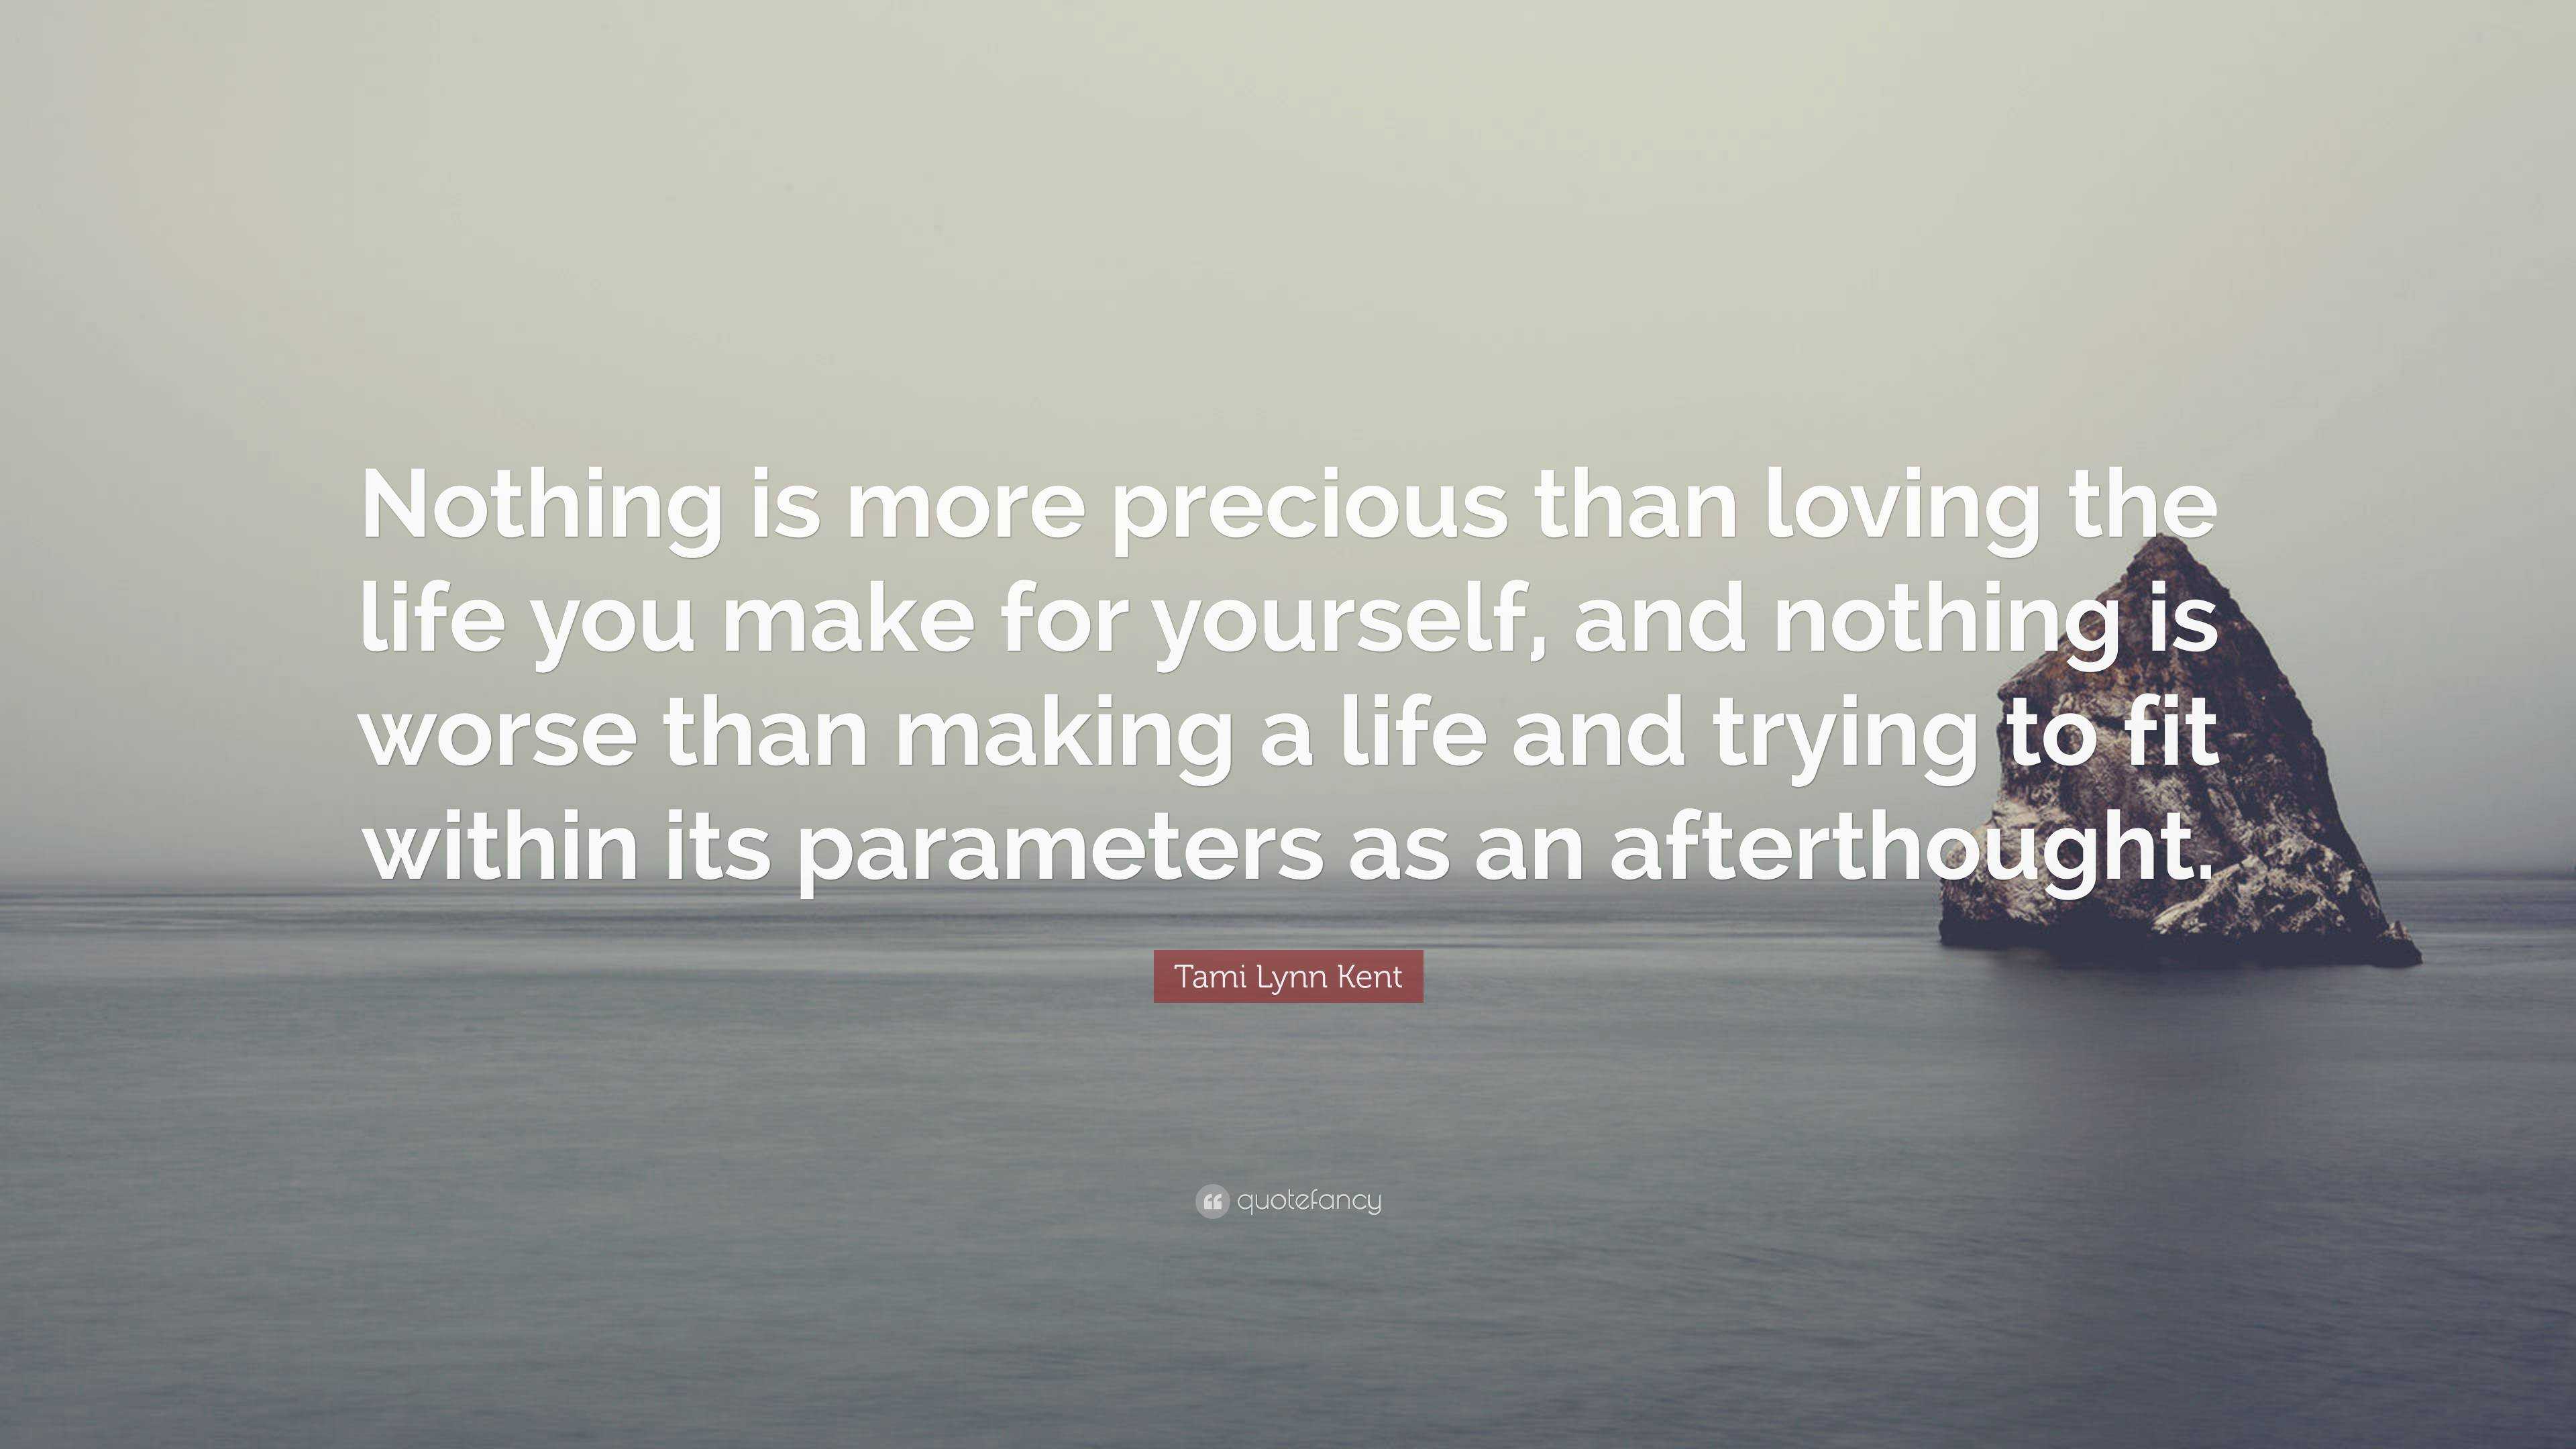 Tami Lynn Kent Quote: “Nothing is more precious than loving the life ...